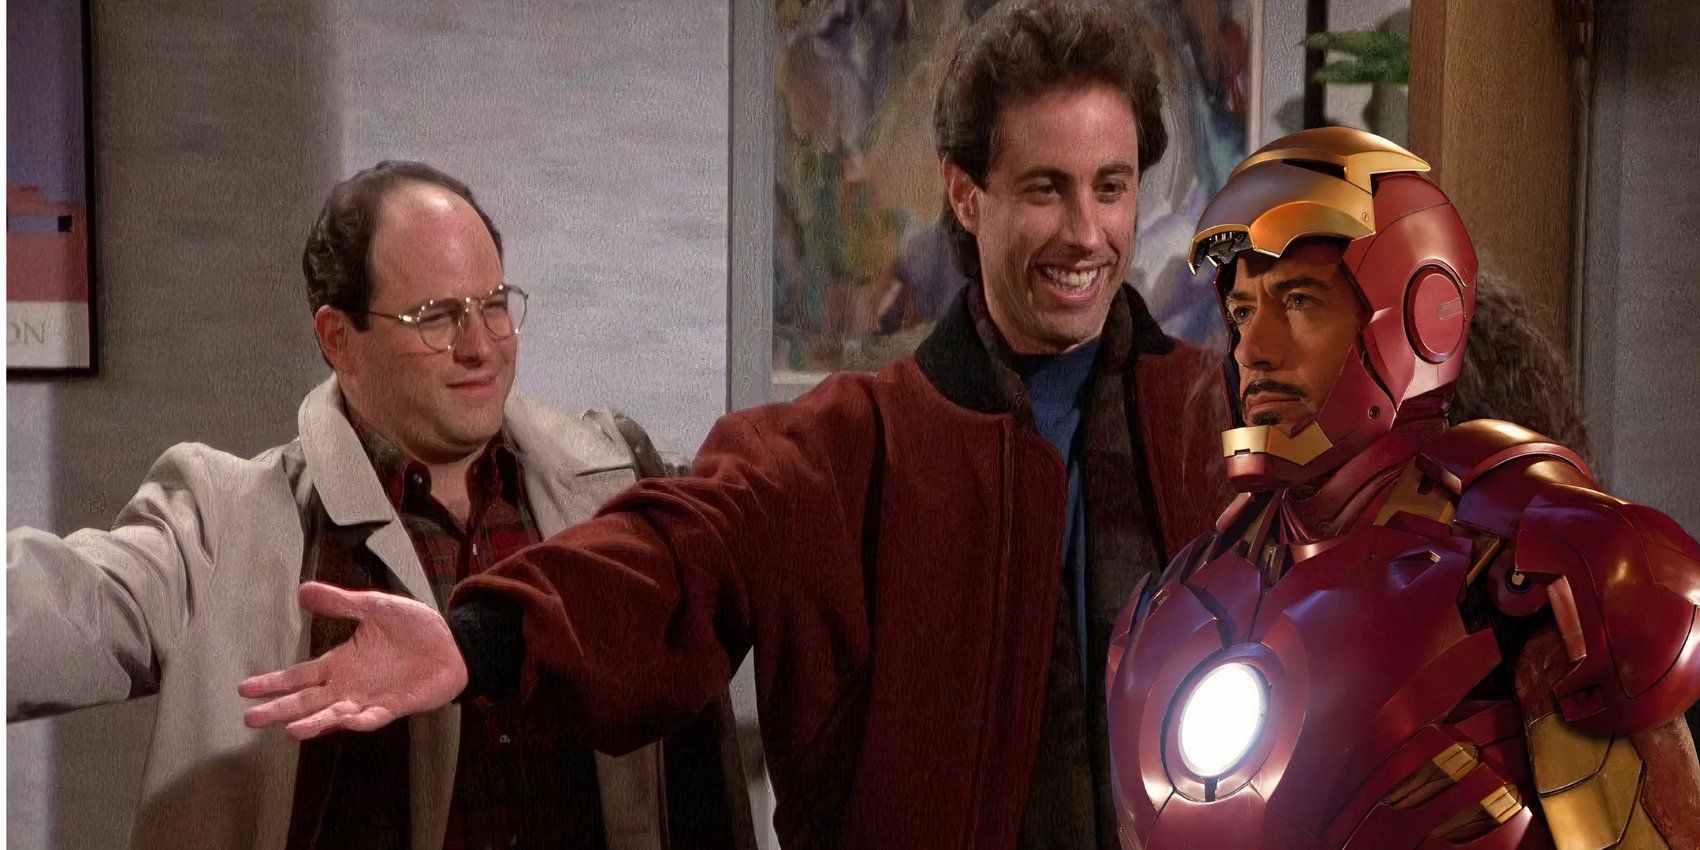 Still of Jerry  & George from Seinfeld (left) with the MCU version of Tony Stark (right) superimposed over top.